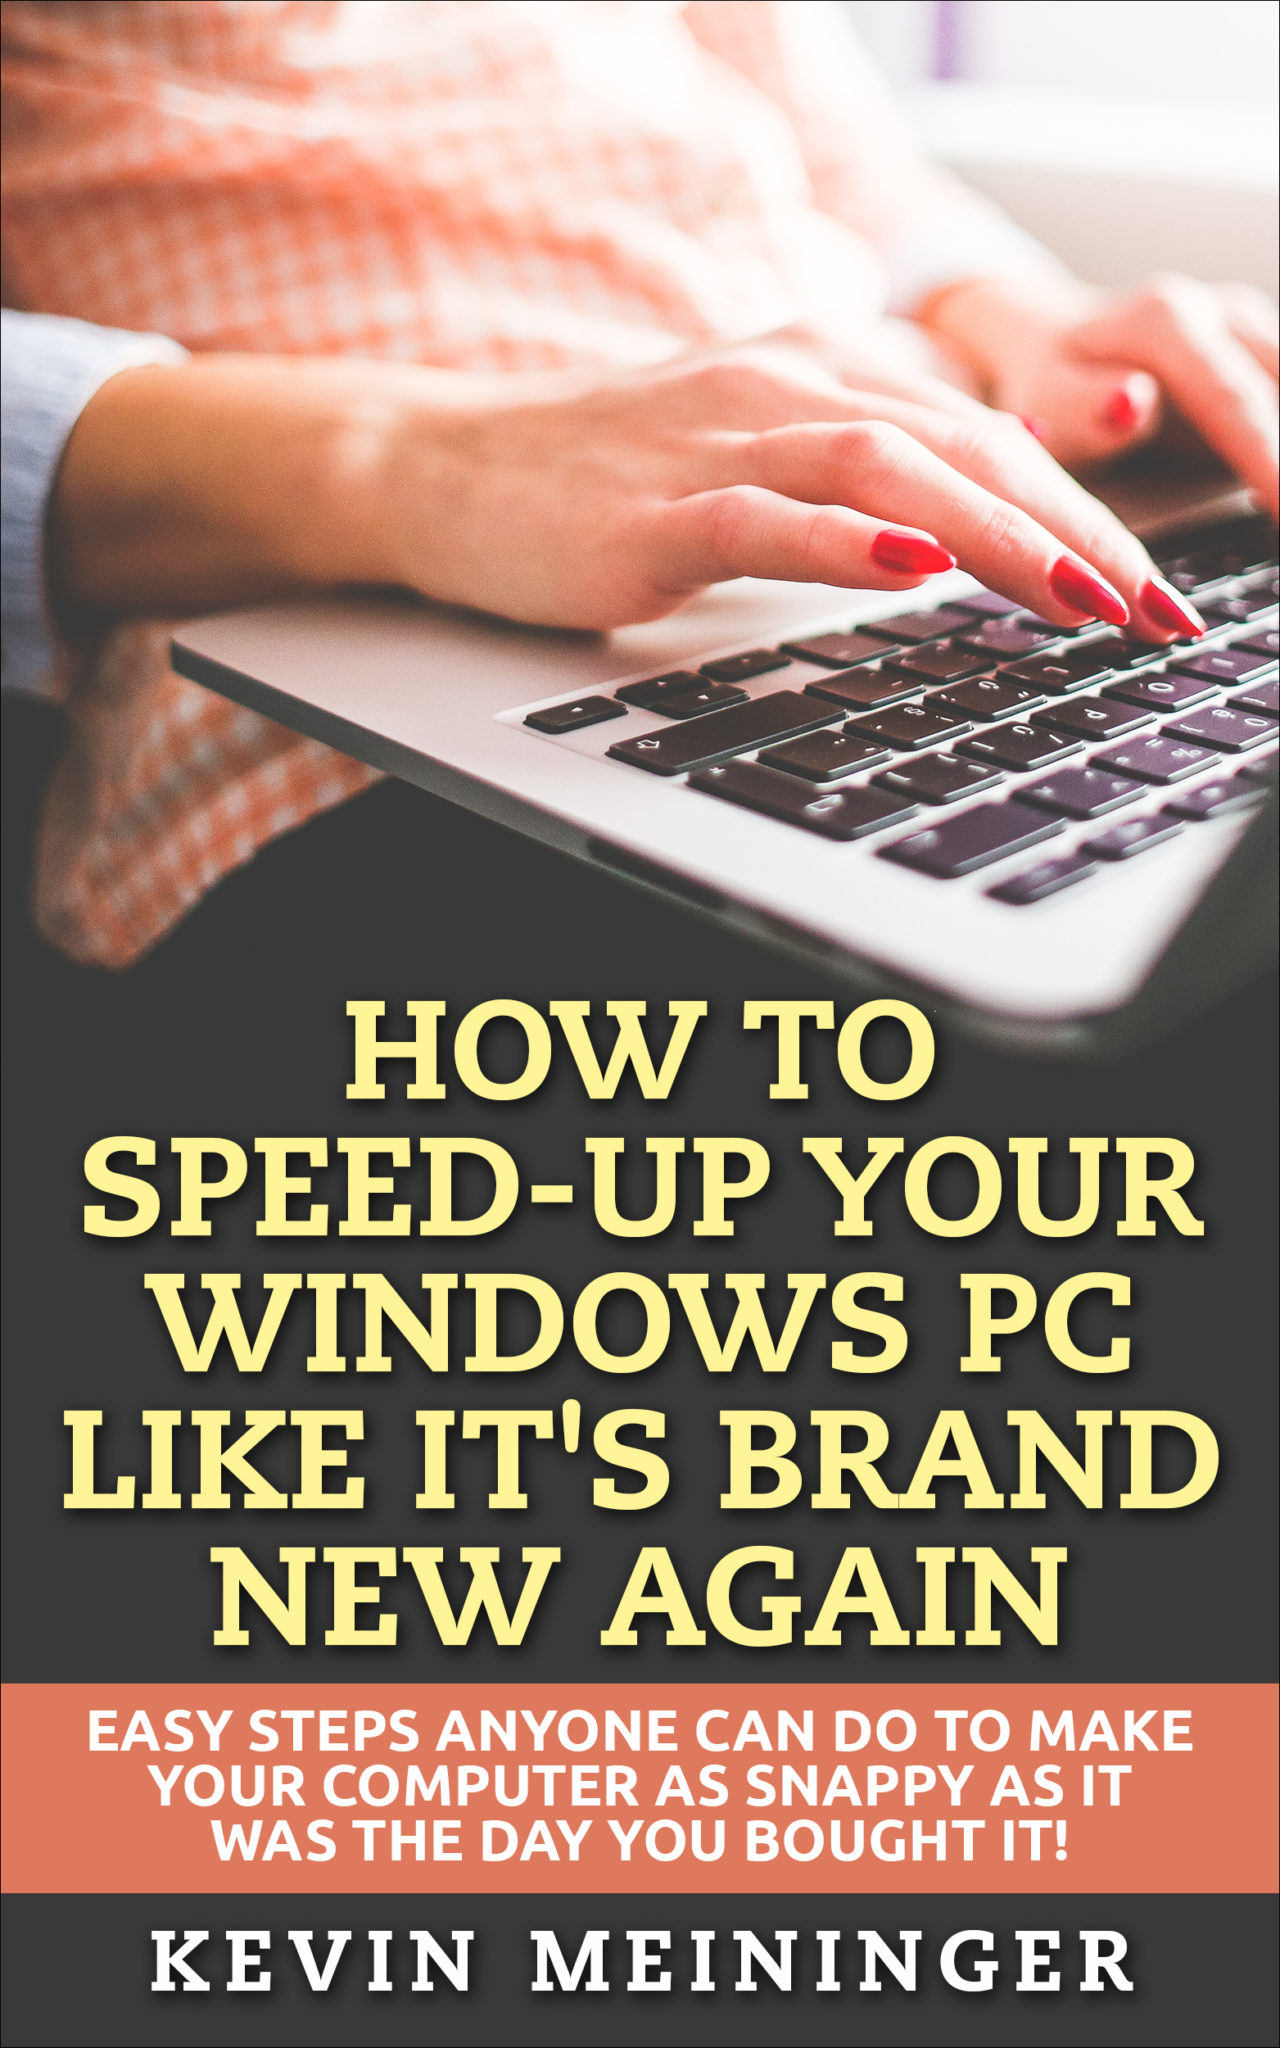 FREE: How to Speed-Up your Windows PC like it’s brand new again: Easy steps anyone can do to make your computer as snappy as it was the day you bought it! by Kevin Meininger